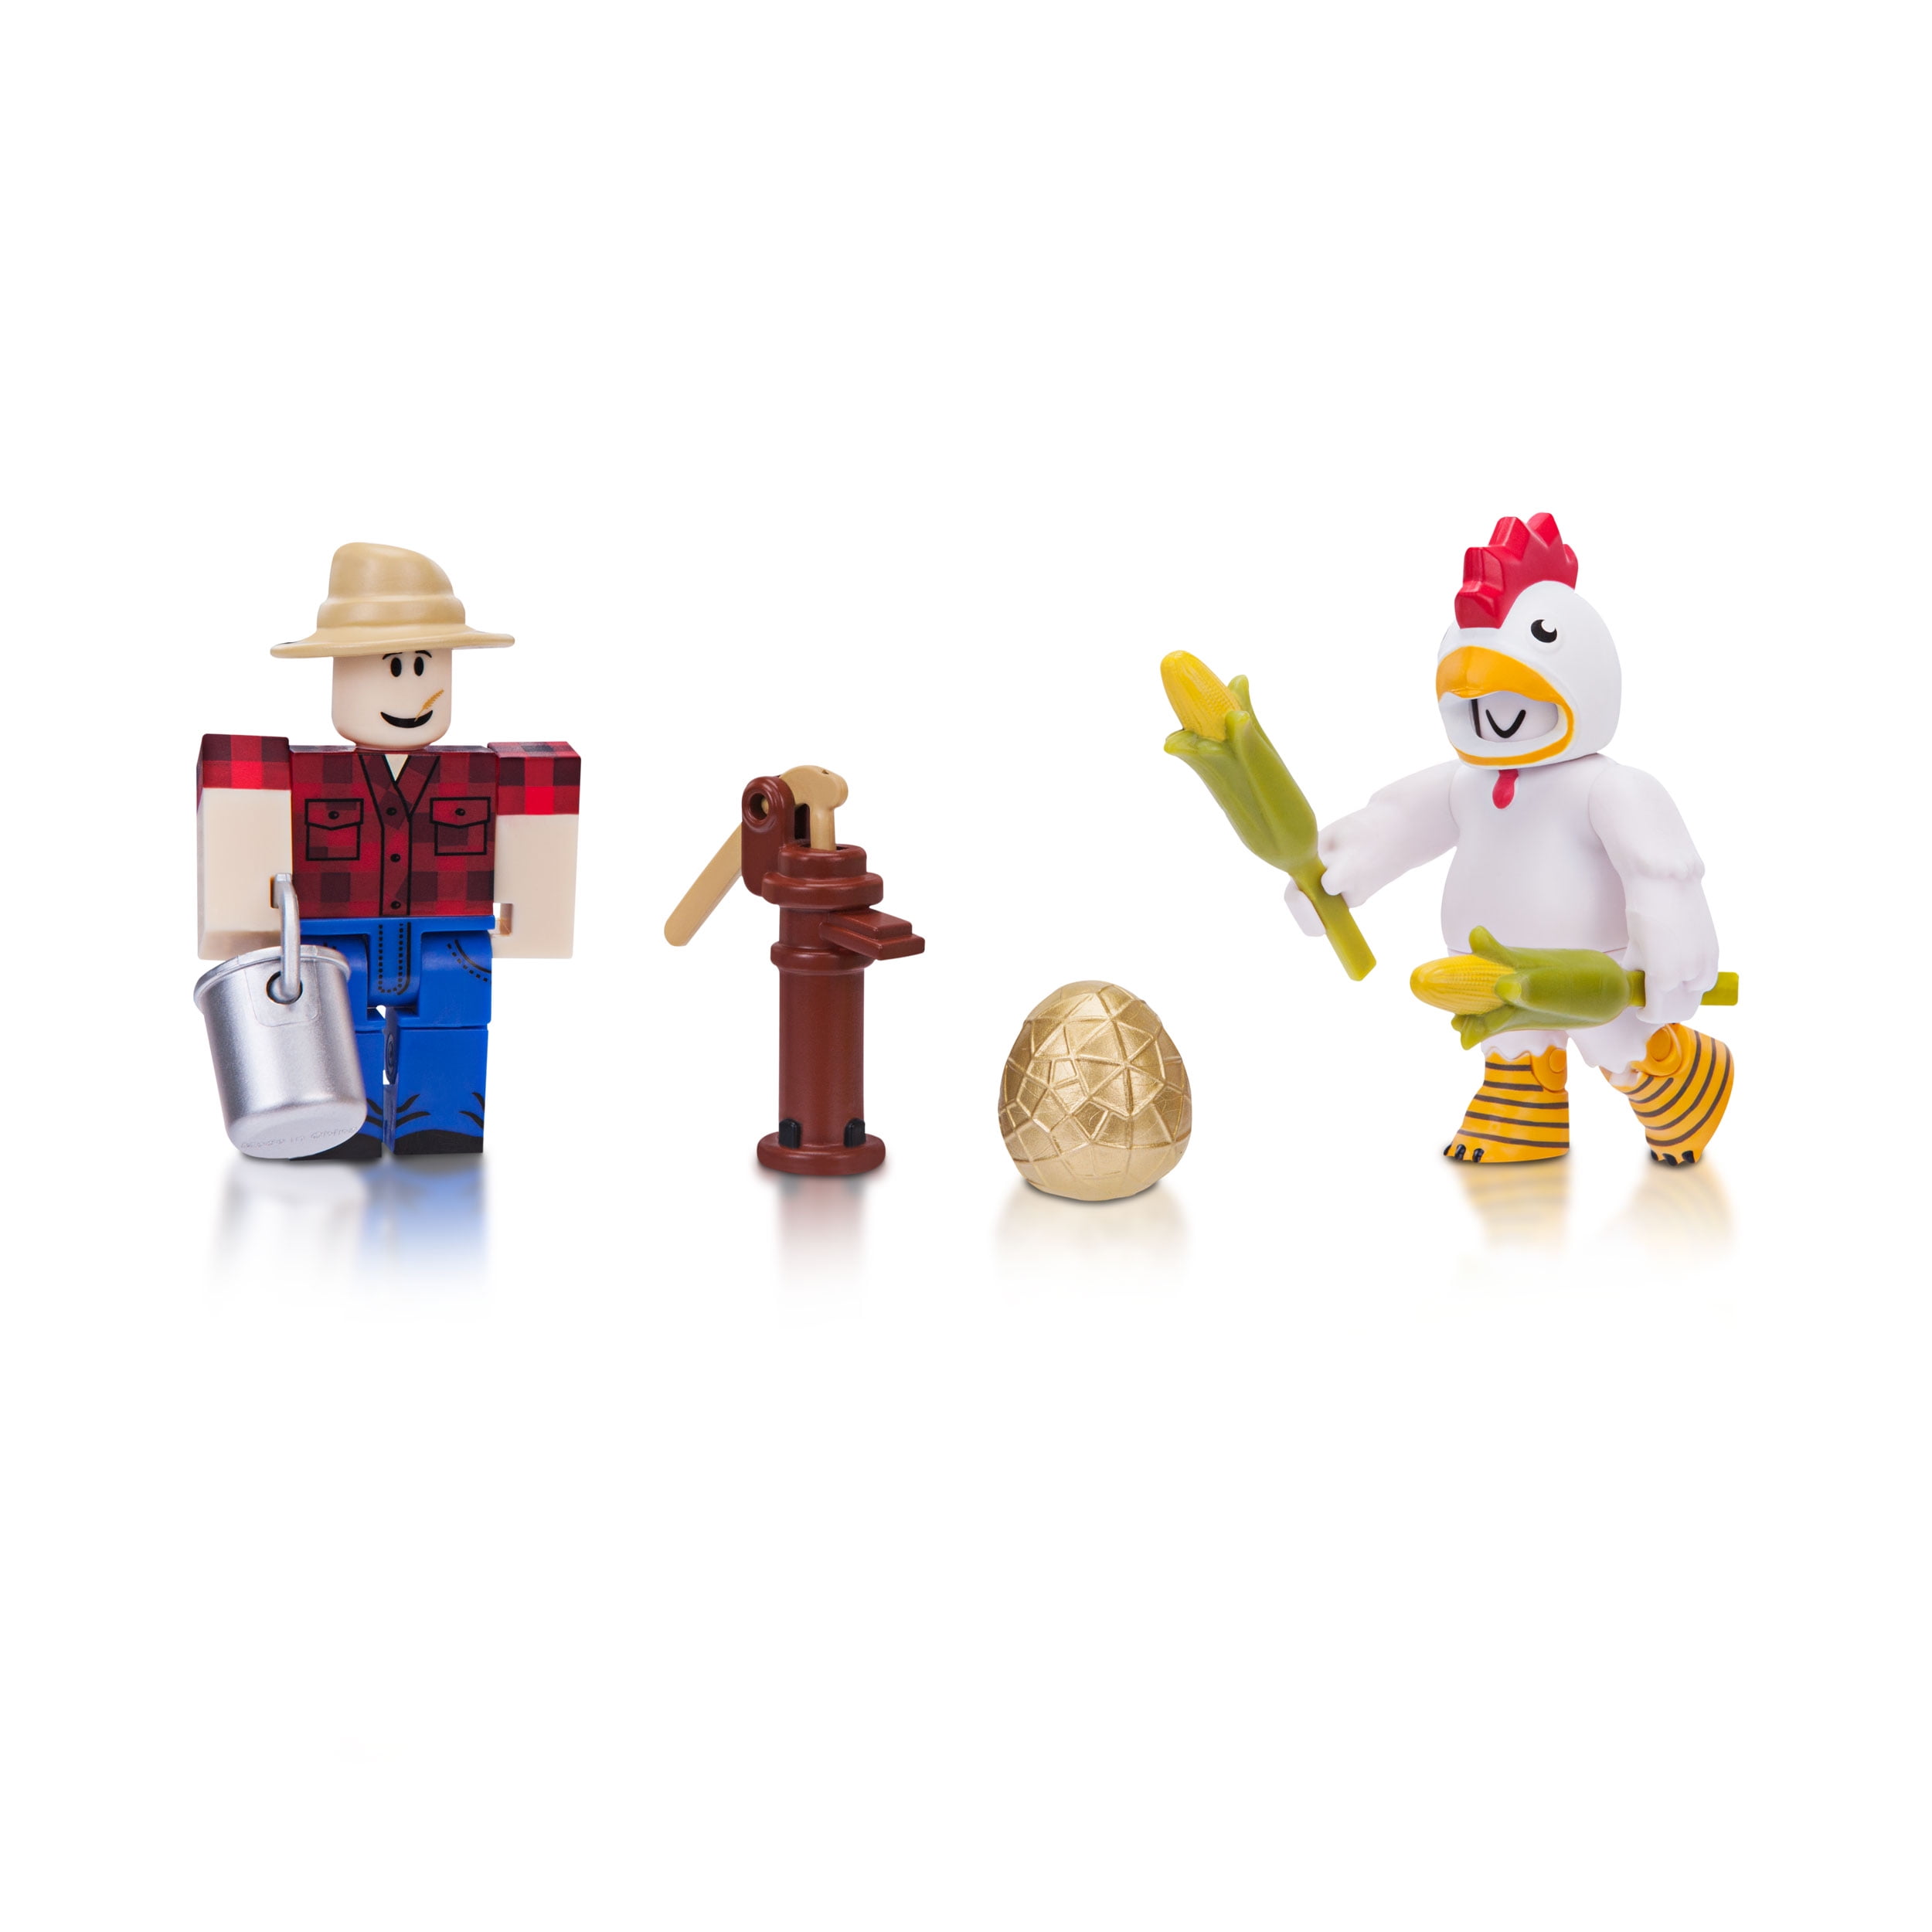 Roblox Action Collection Chicken Simulator Game Pack Includes Exclusive Virtual Item Walmart Com Walmart Com - roblox mining simulator gameplay july 4th pack 7 new